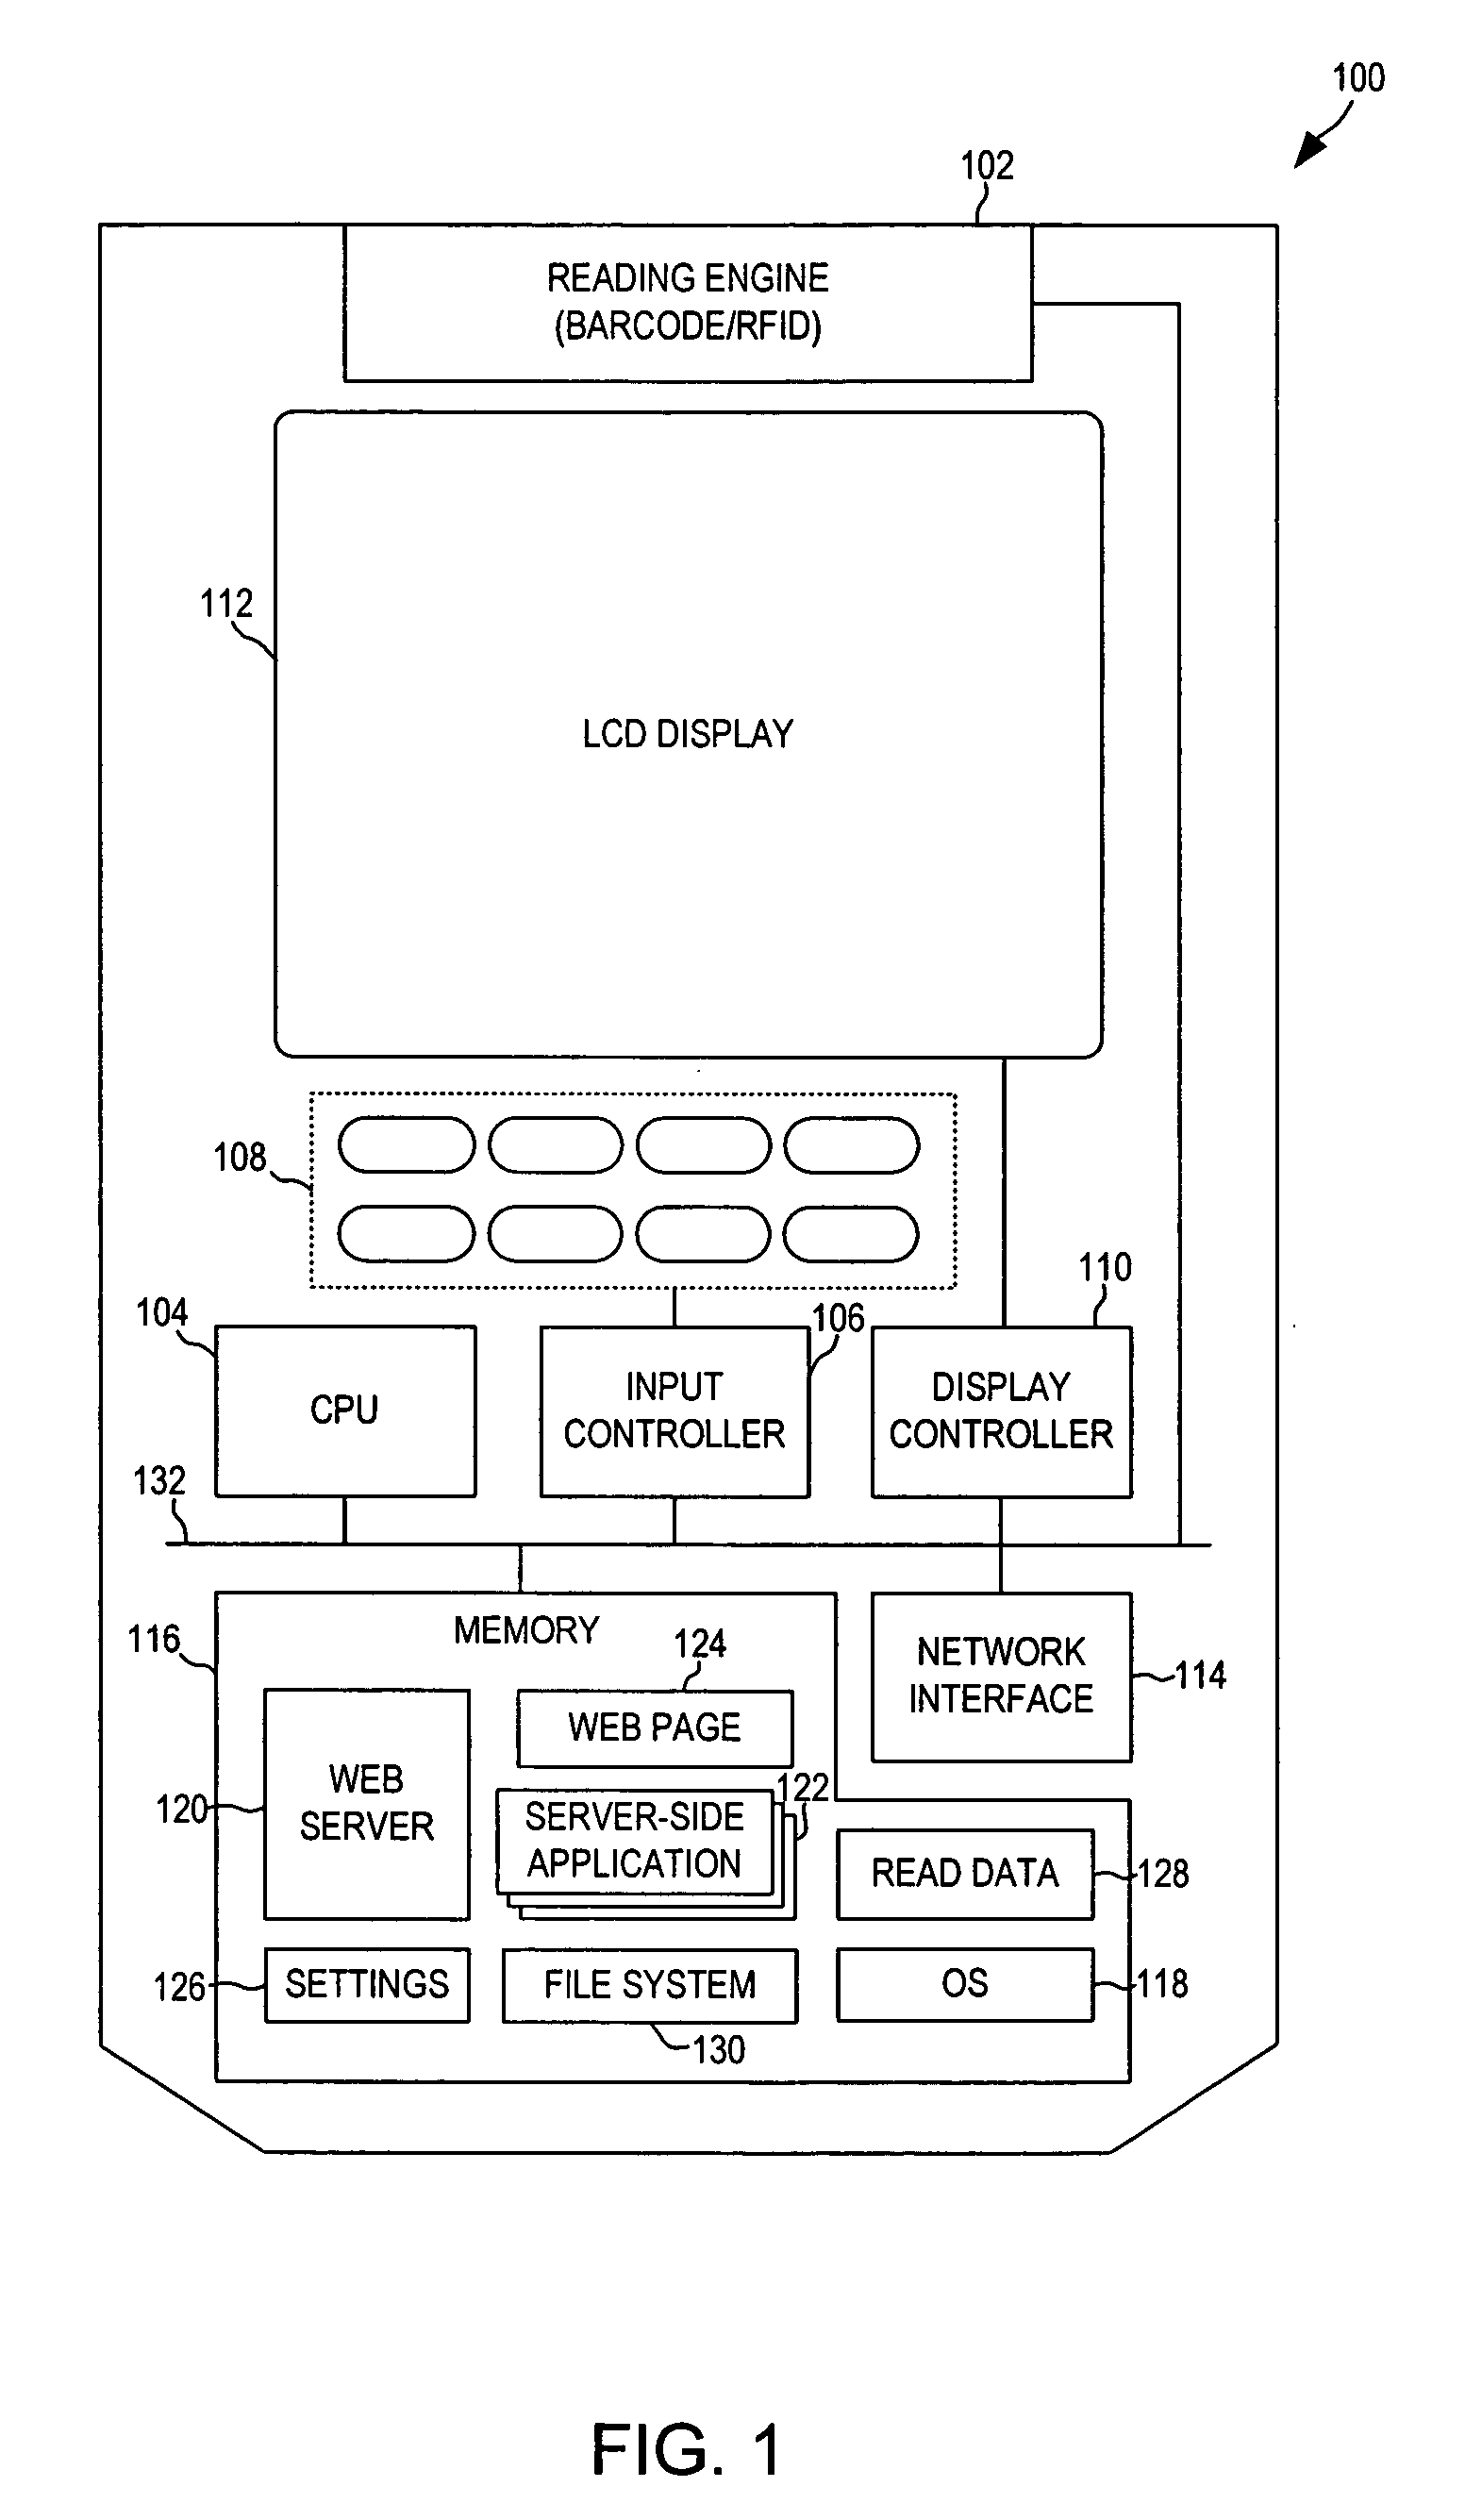 Portable data reading device with integrated web server for configuration and data extraction